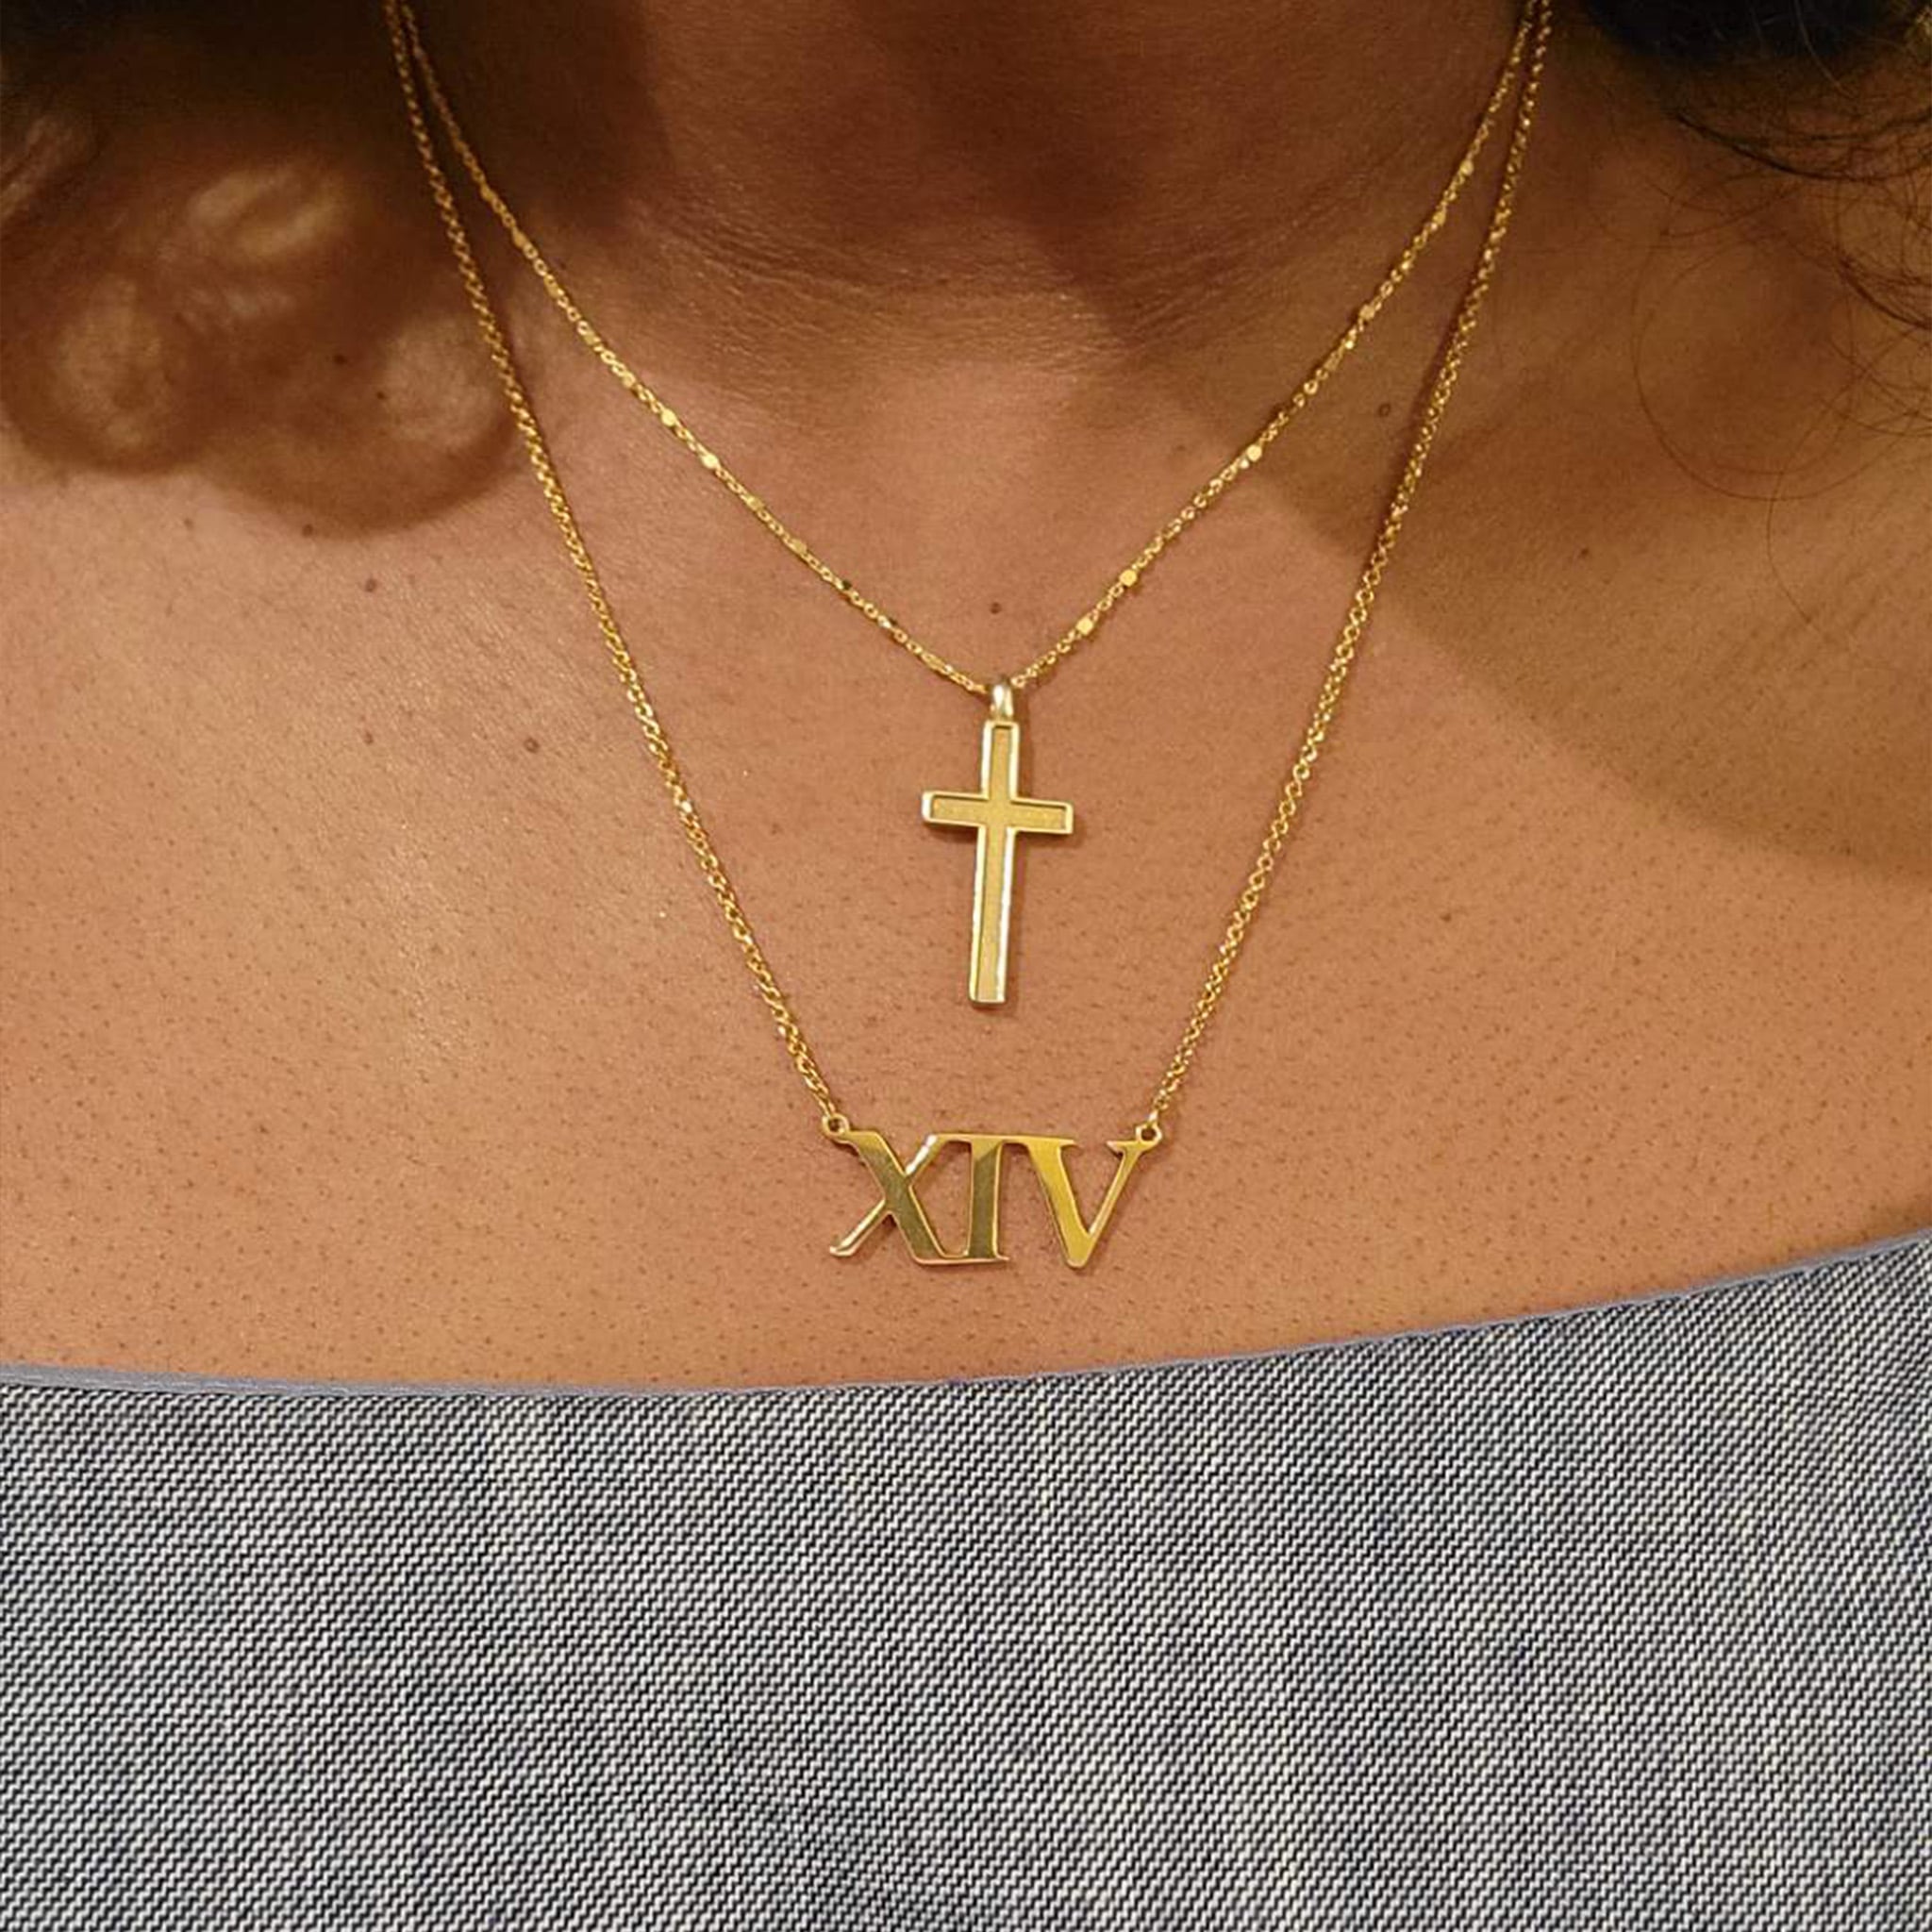 Gold Cross Stacked with XIV Nameplate Necklace